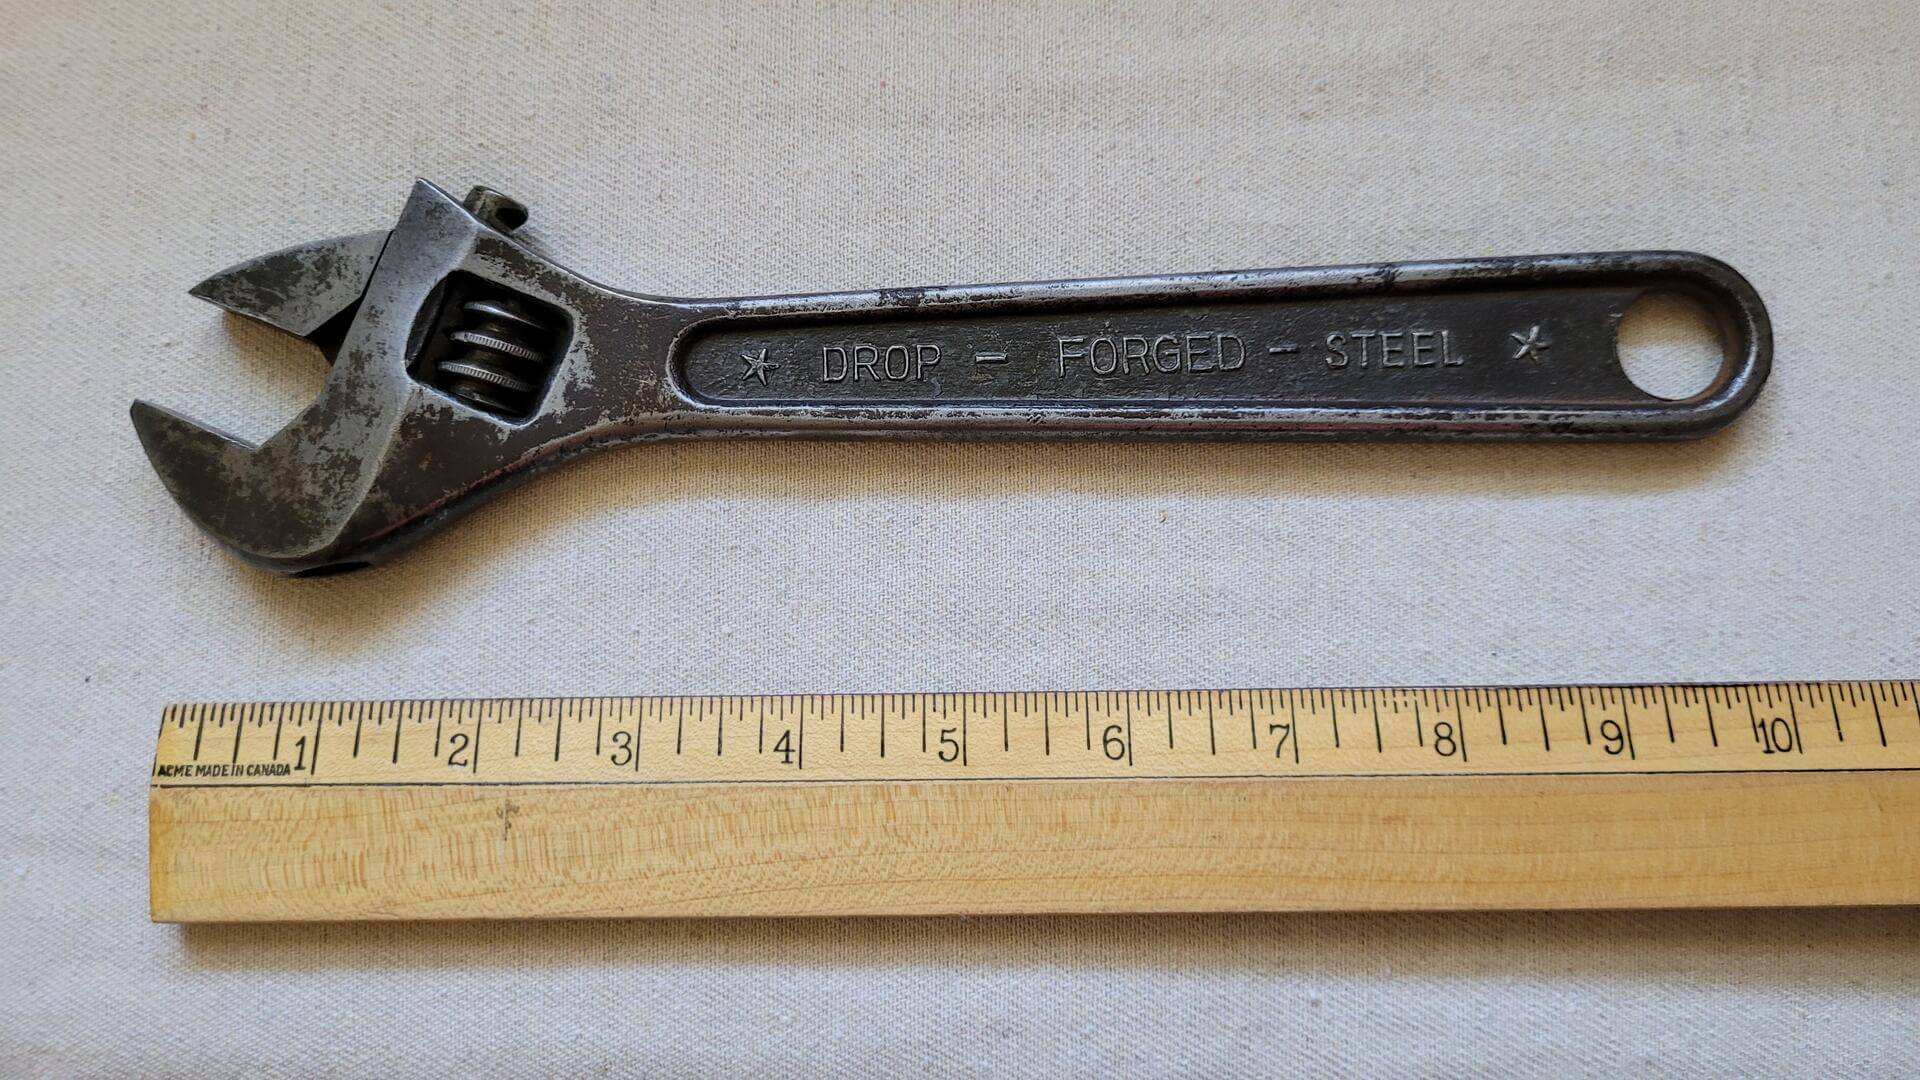 Quality vintage Zerem No. 360 ajustable forged steel spanner wrench 5/8 x 10". Antique made in Germany collectible mechanic tools